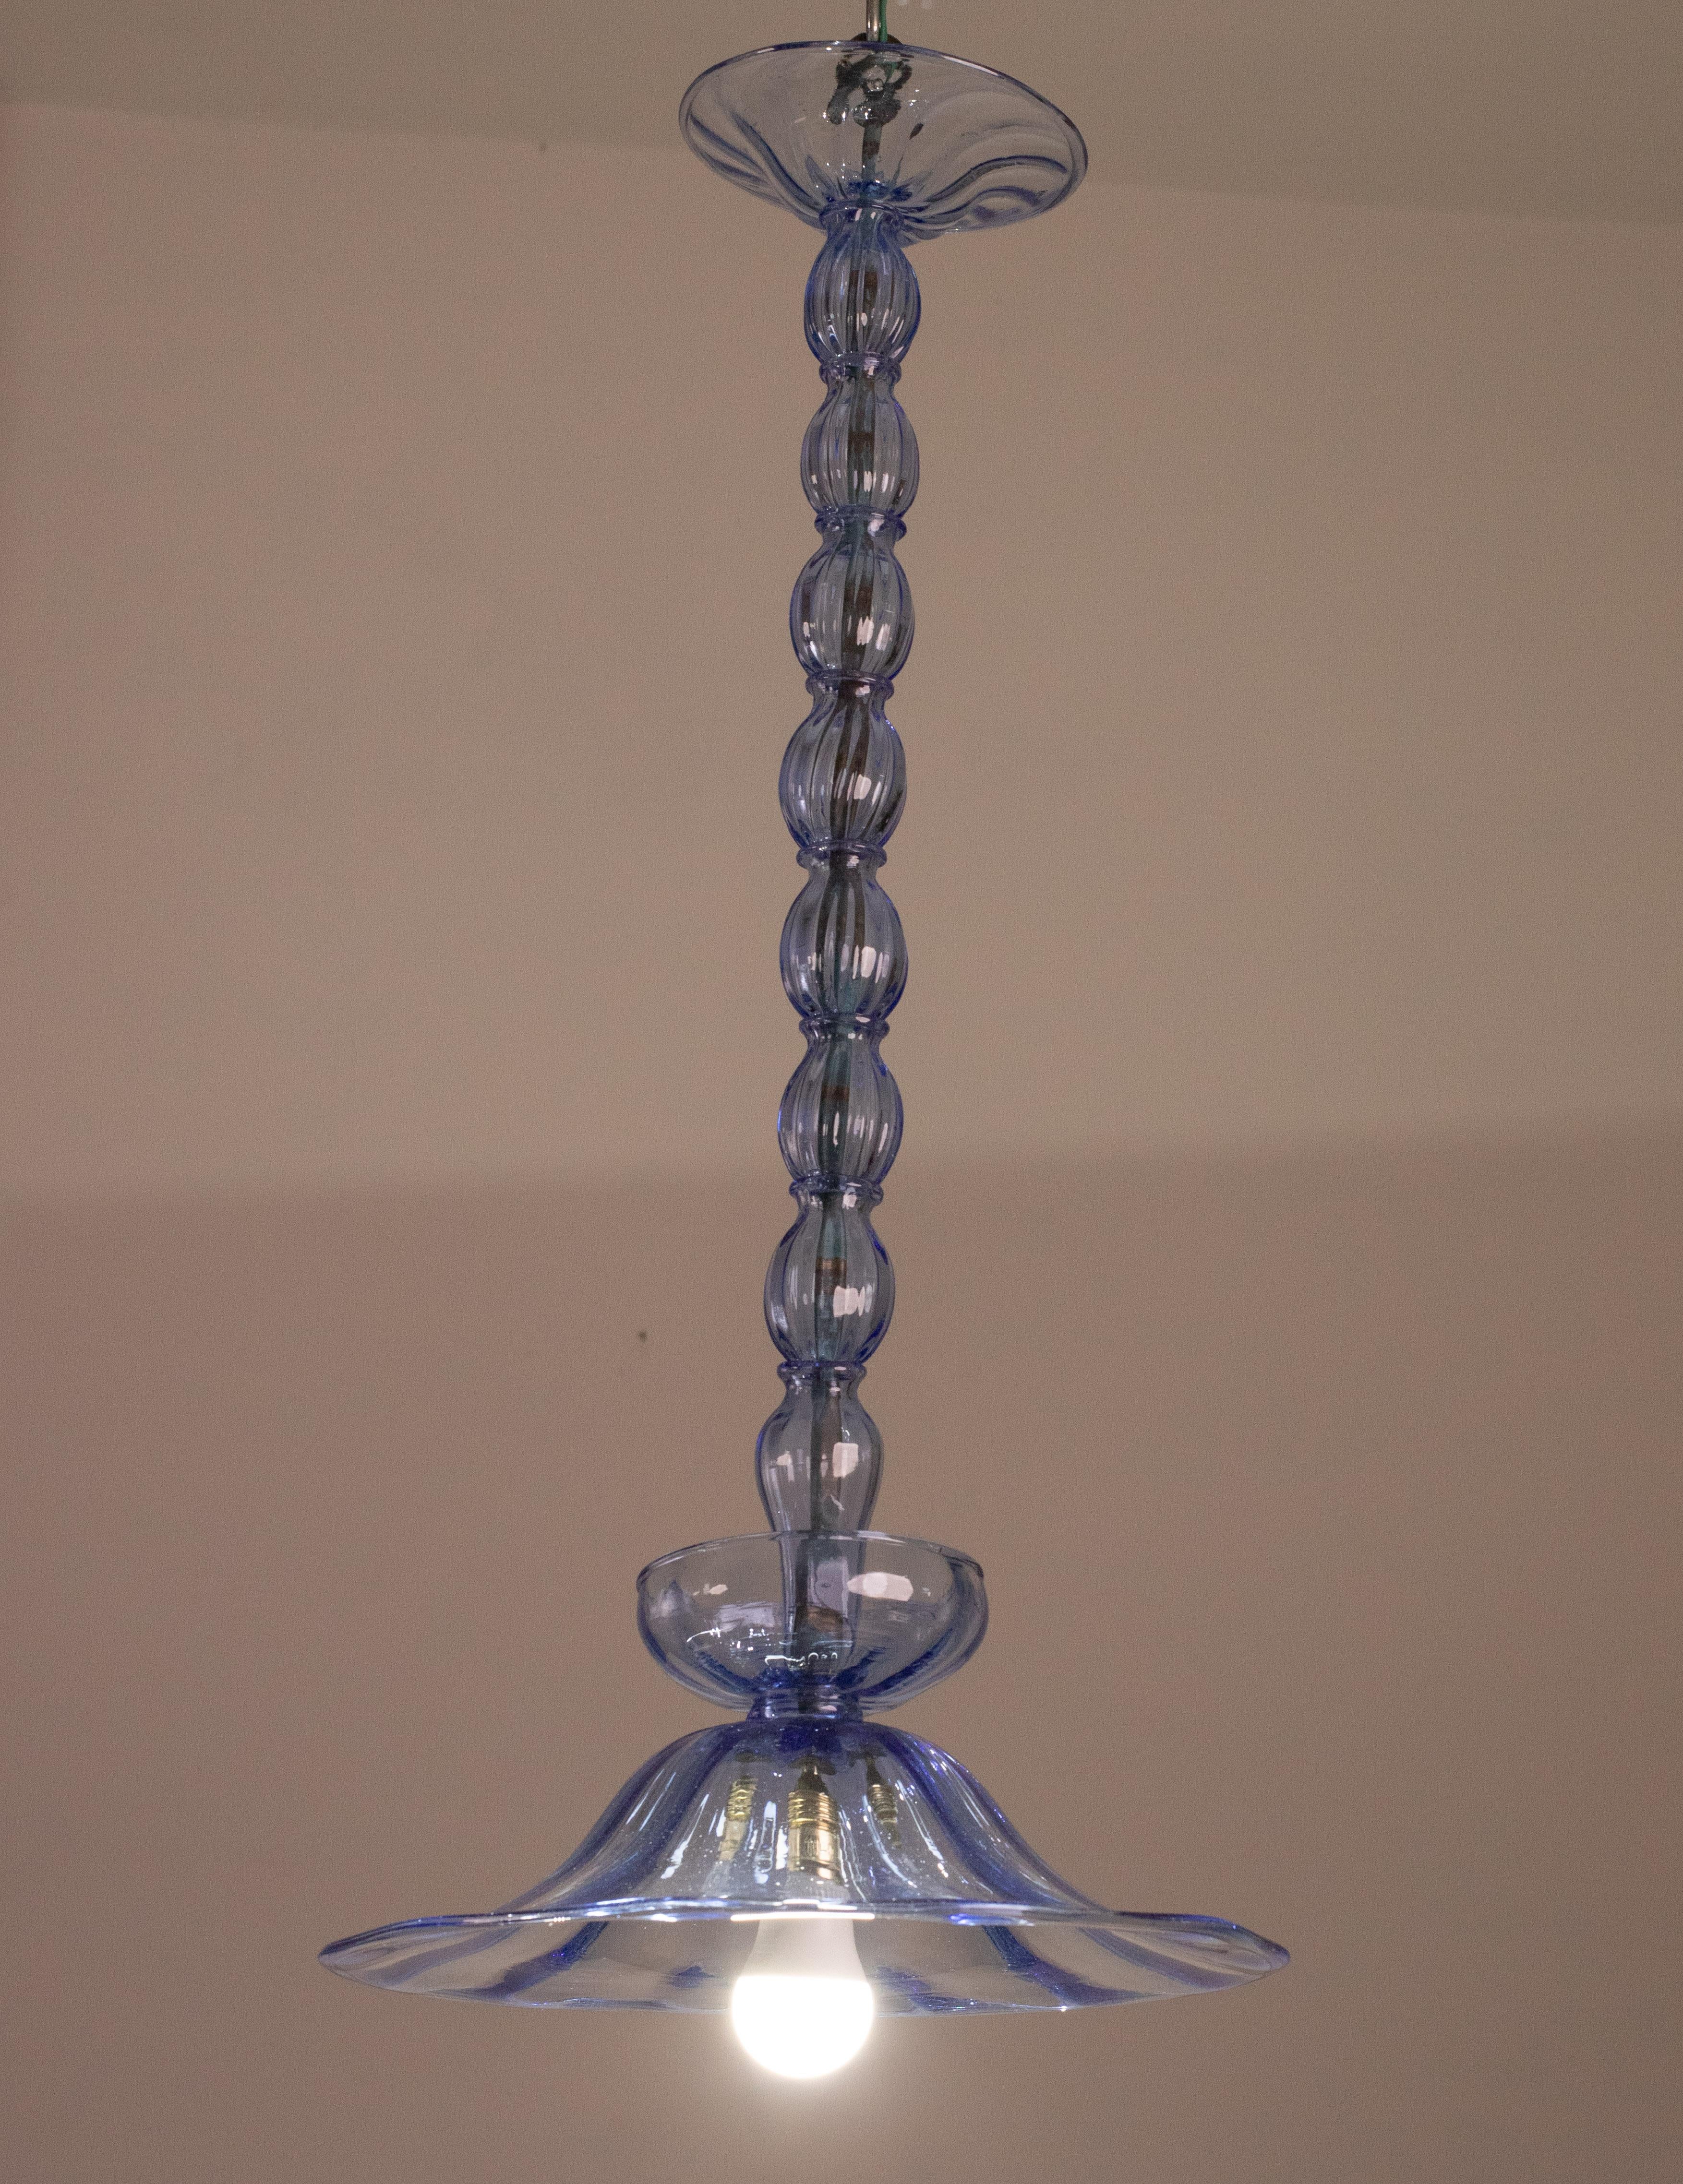 Stunning and elegant designer chandelier attributed to Venini, model Doge.

The chandelier consists of a hat cup and some glass elements that form the skeleton.

One glass has a small lesion, visible in the last photo, not visible when the